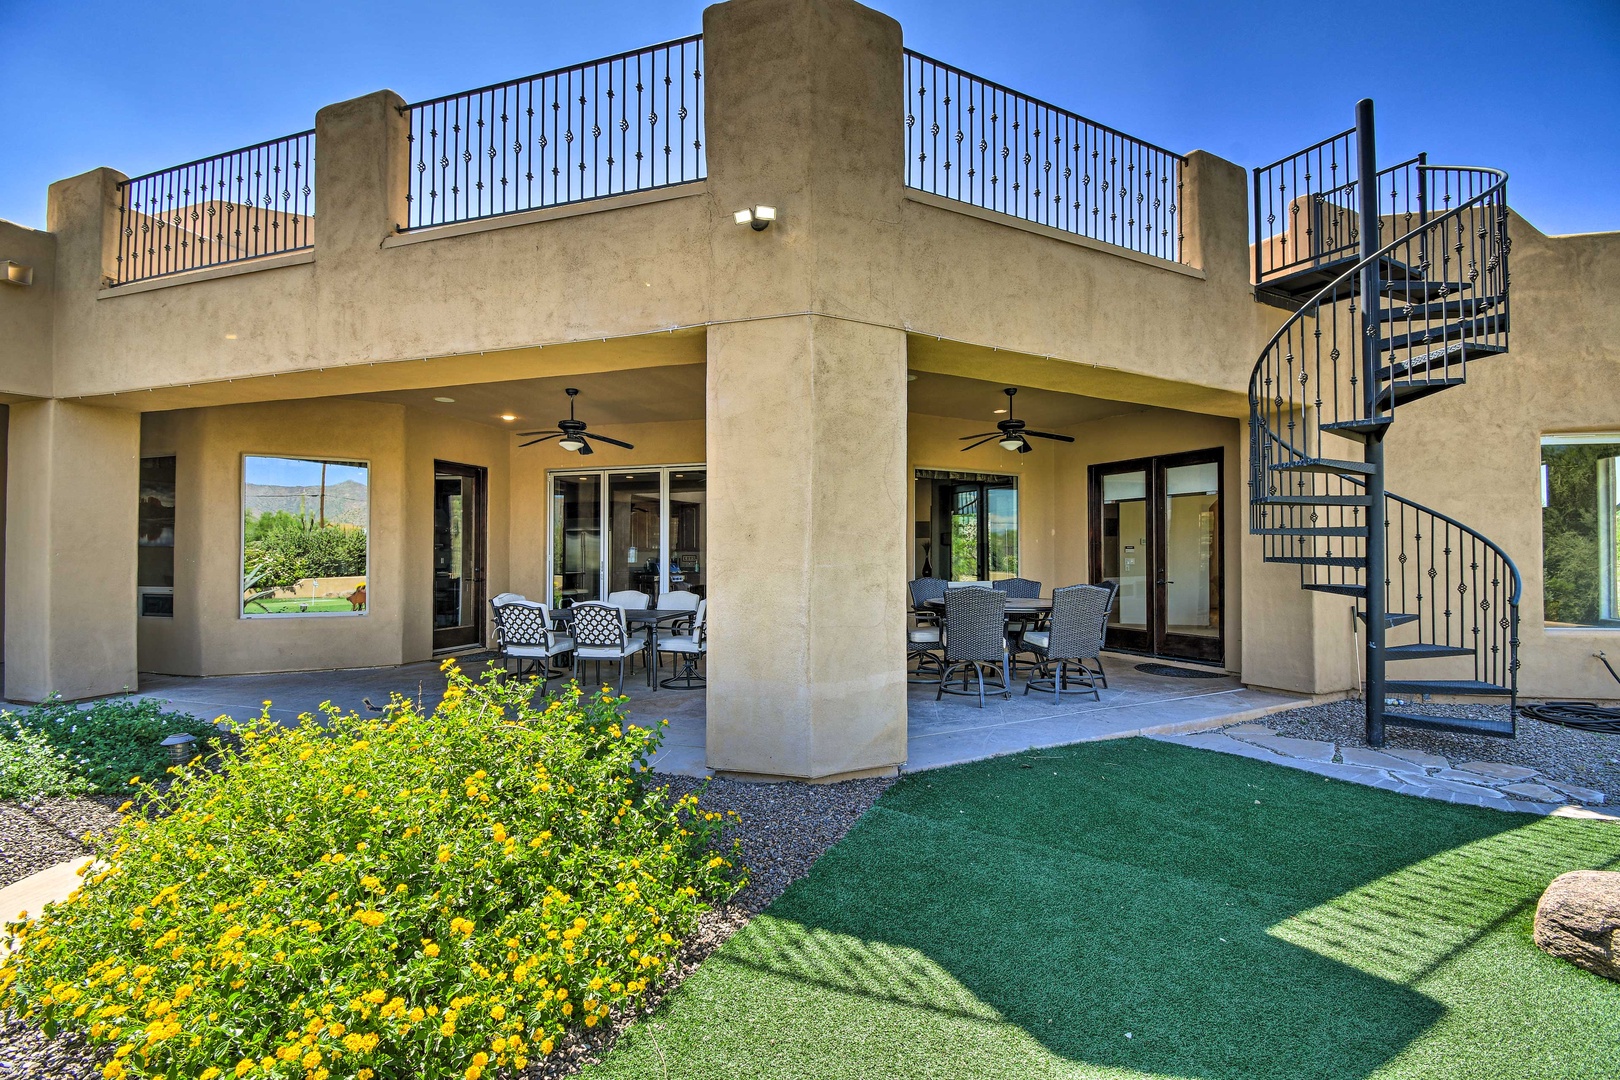 Enjoy a meal or an evening beverage in the shade on the spacious patio